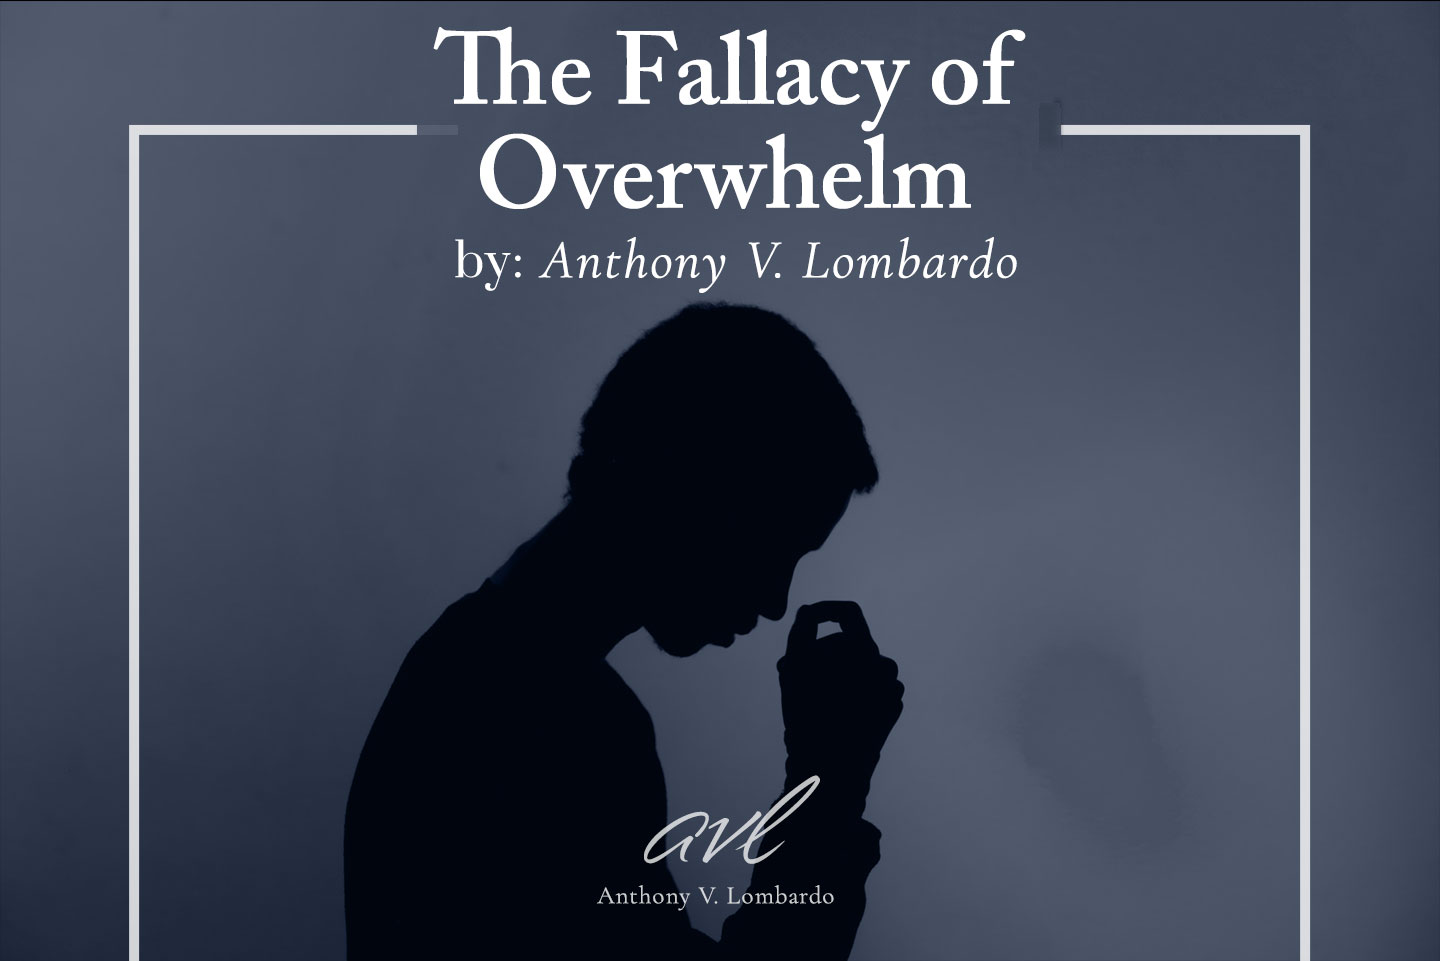 The Fallacy of Overwhelm